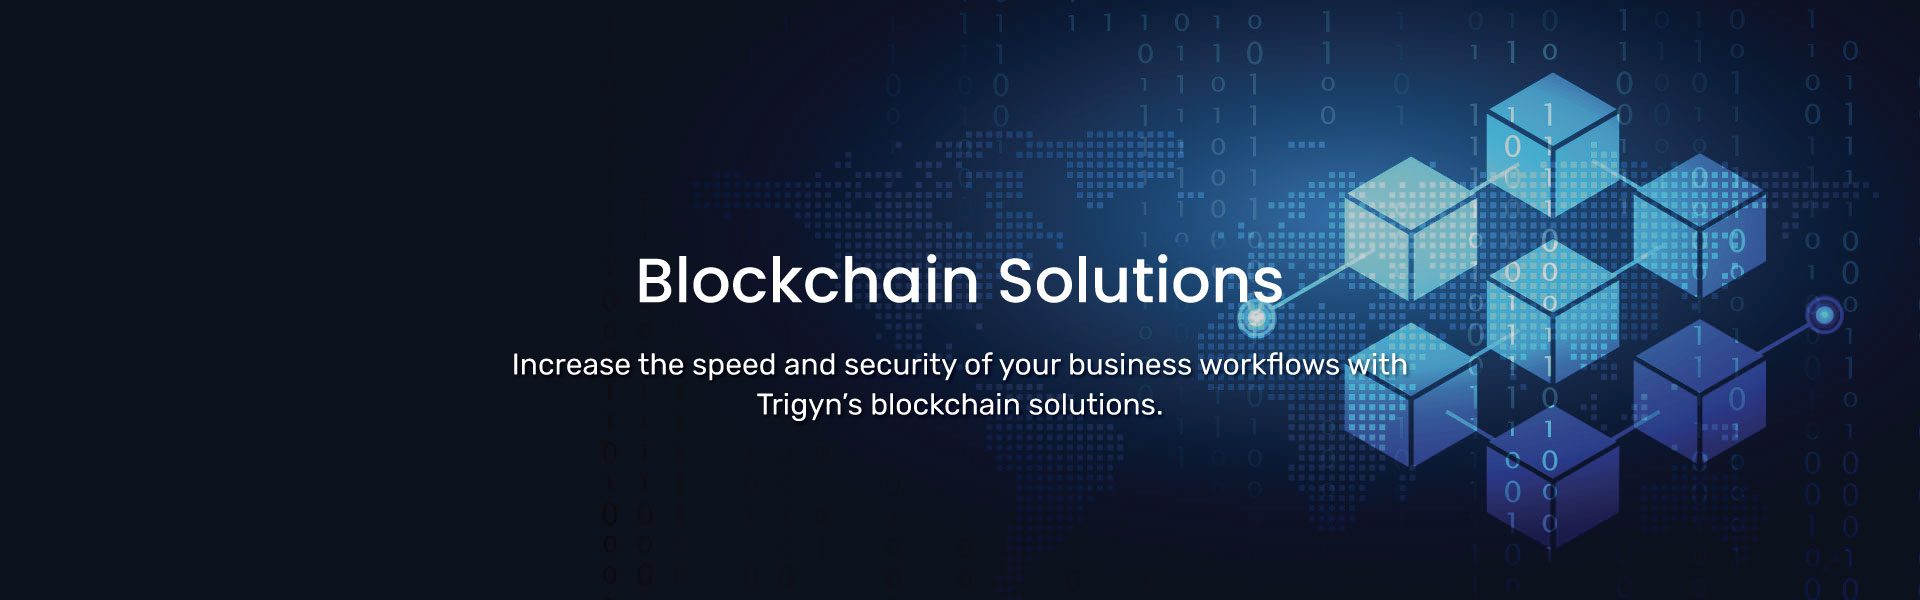 Trigyn’s Blockchain Solutions & Services